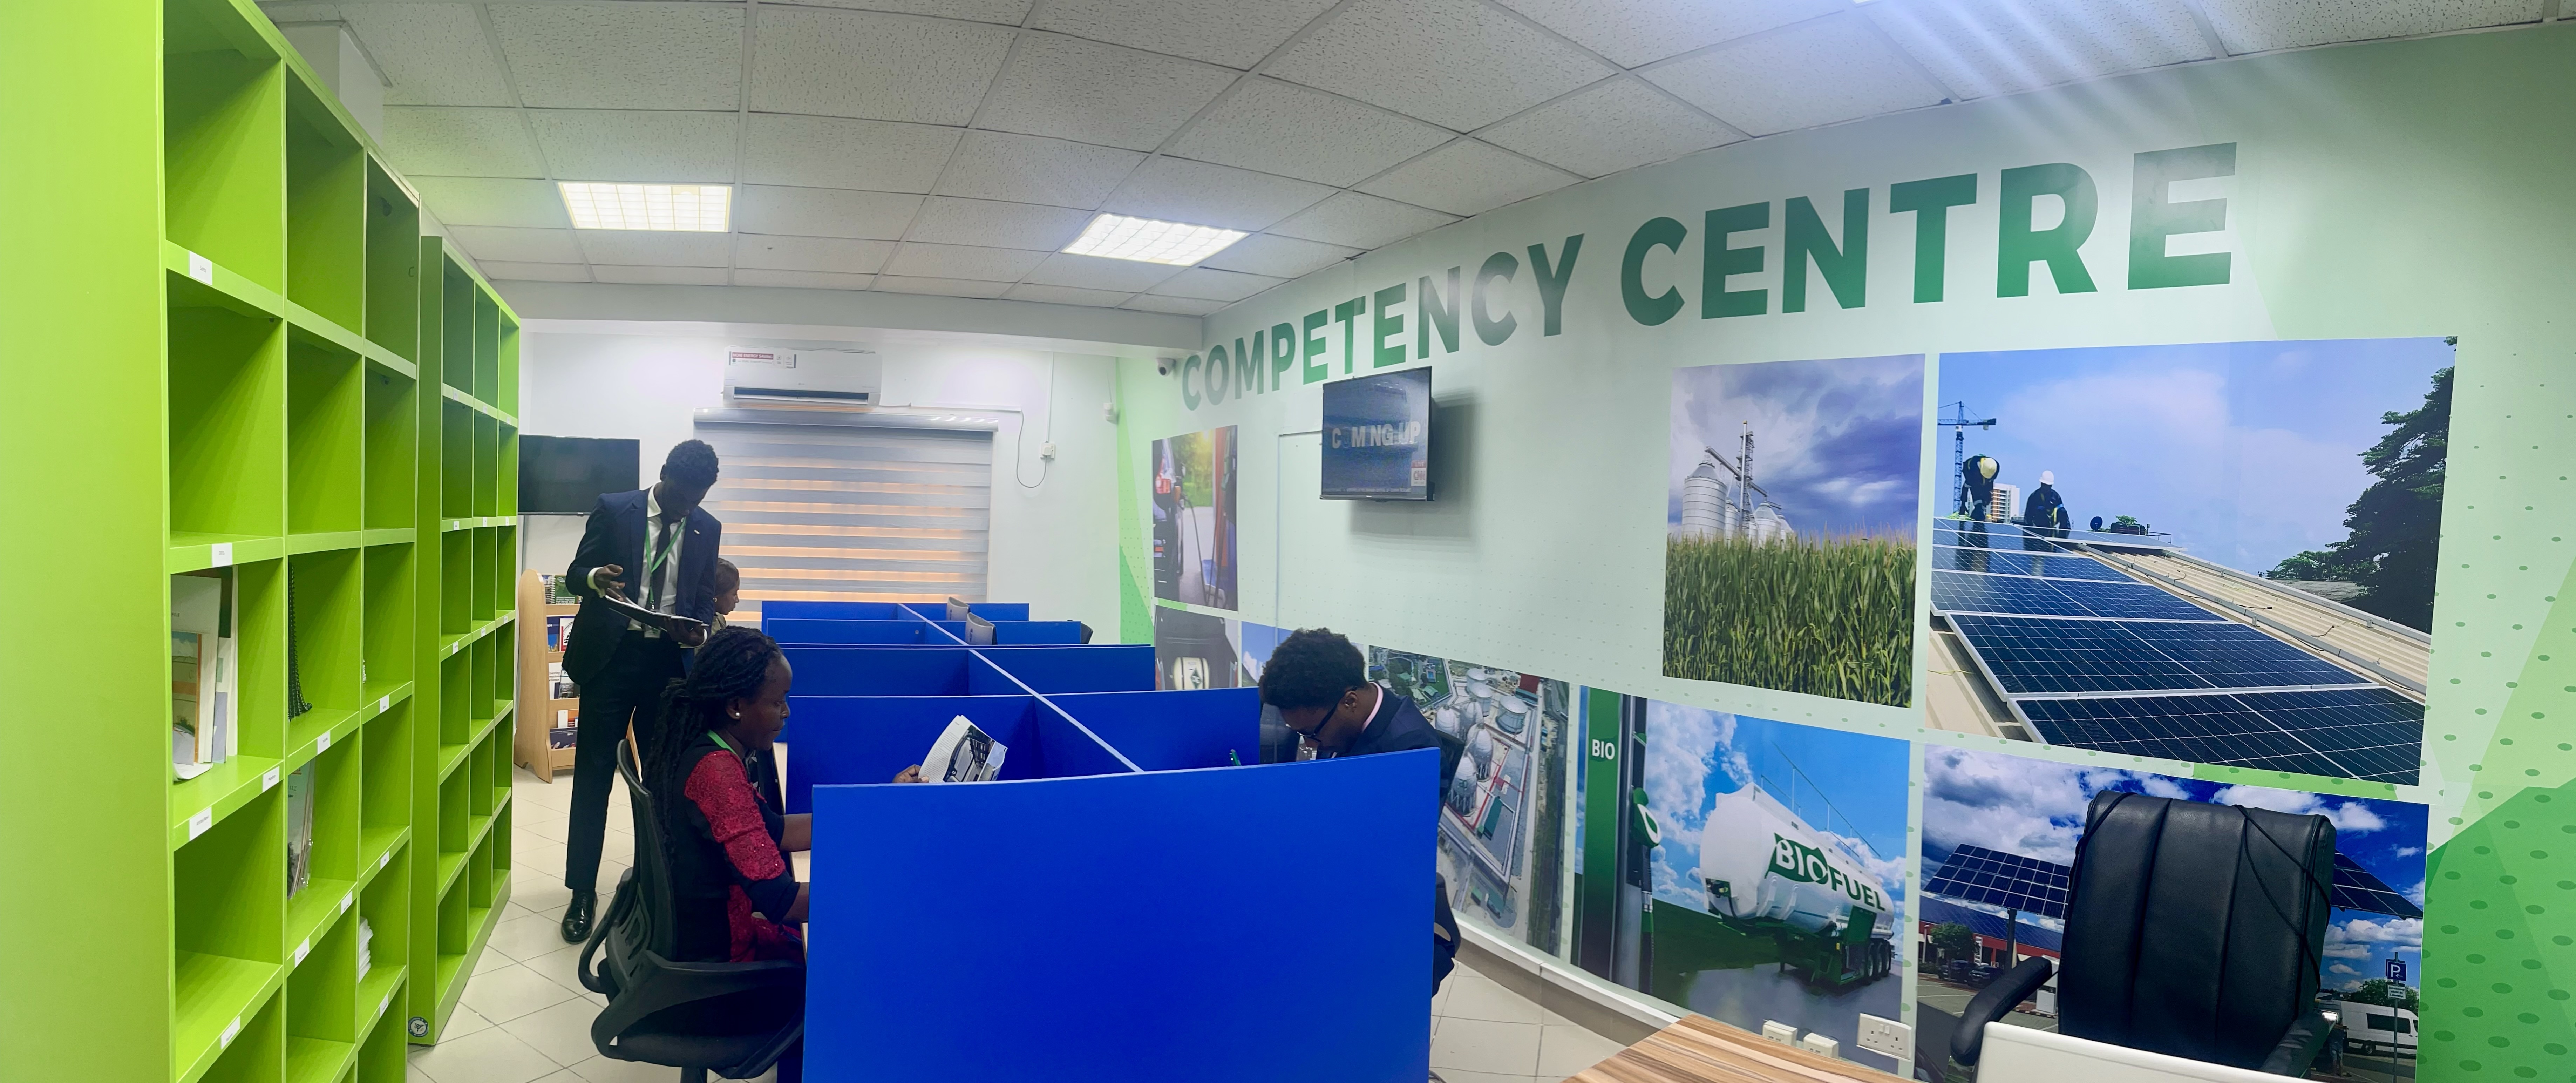 Competency Centre 2